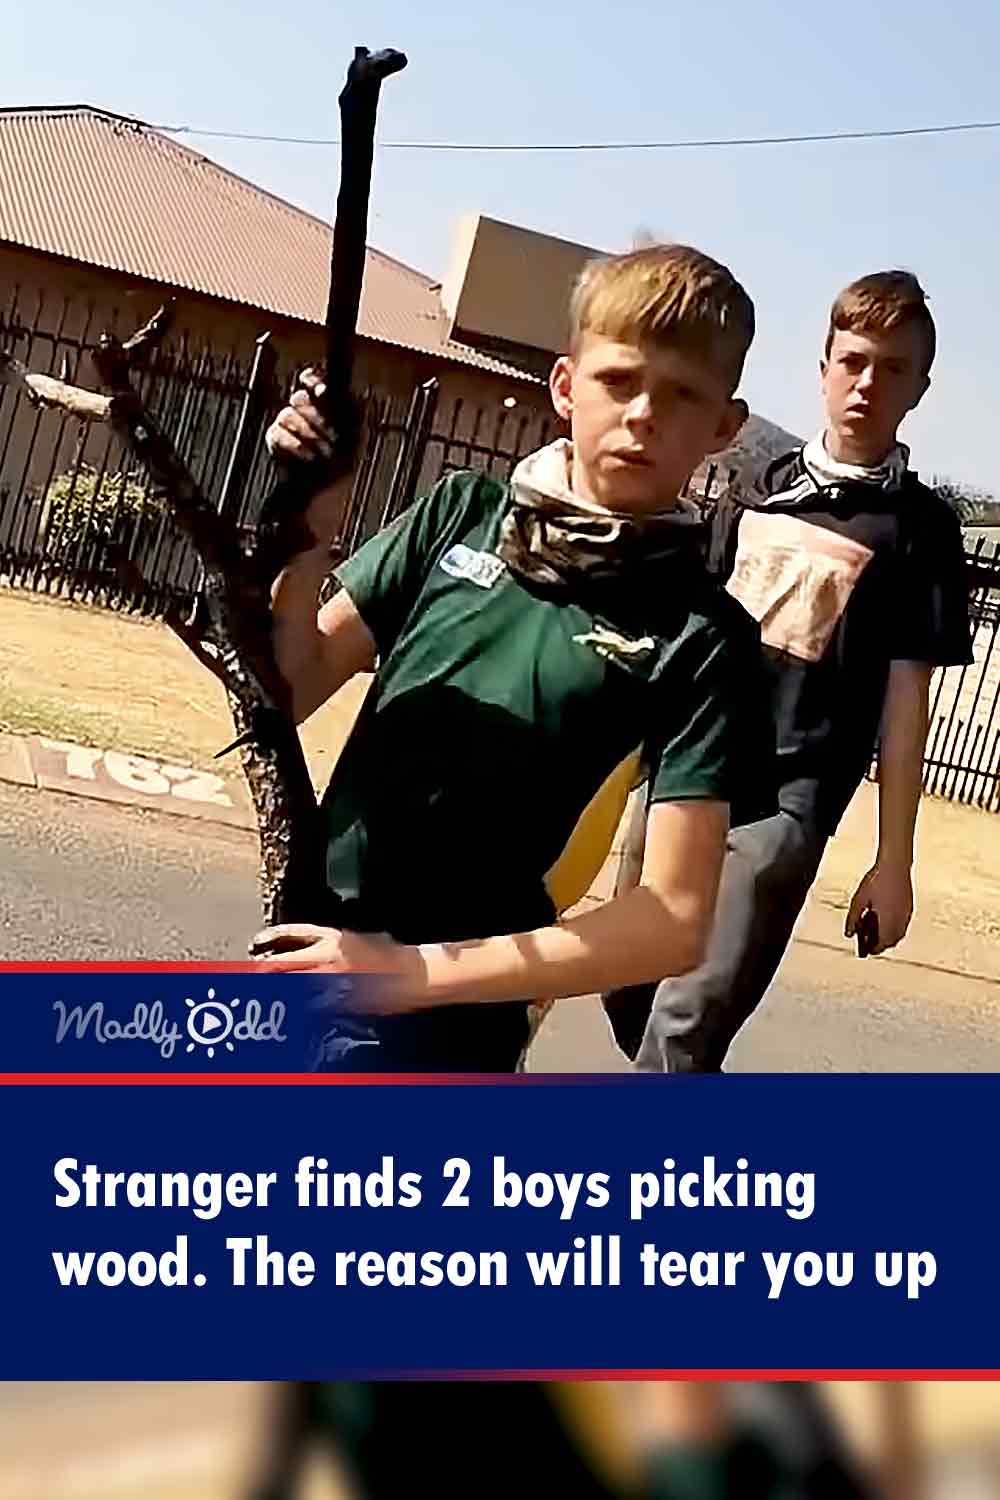 Stranger finds 2 boys picking wood. The reason will tear you up